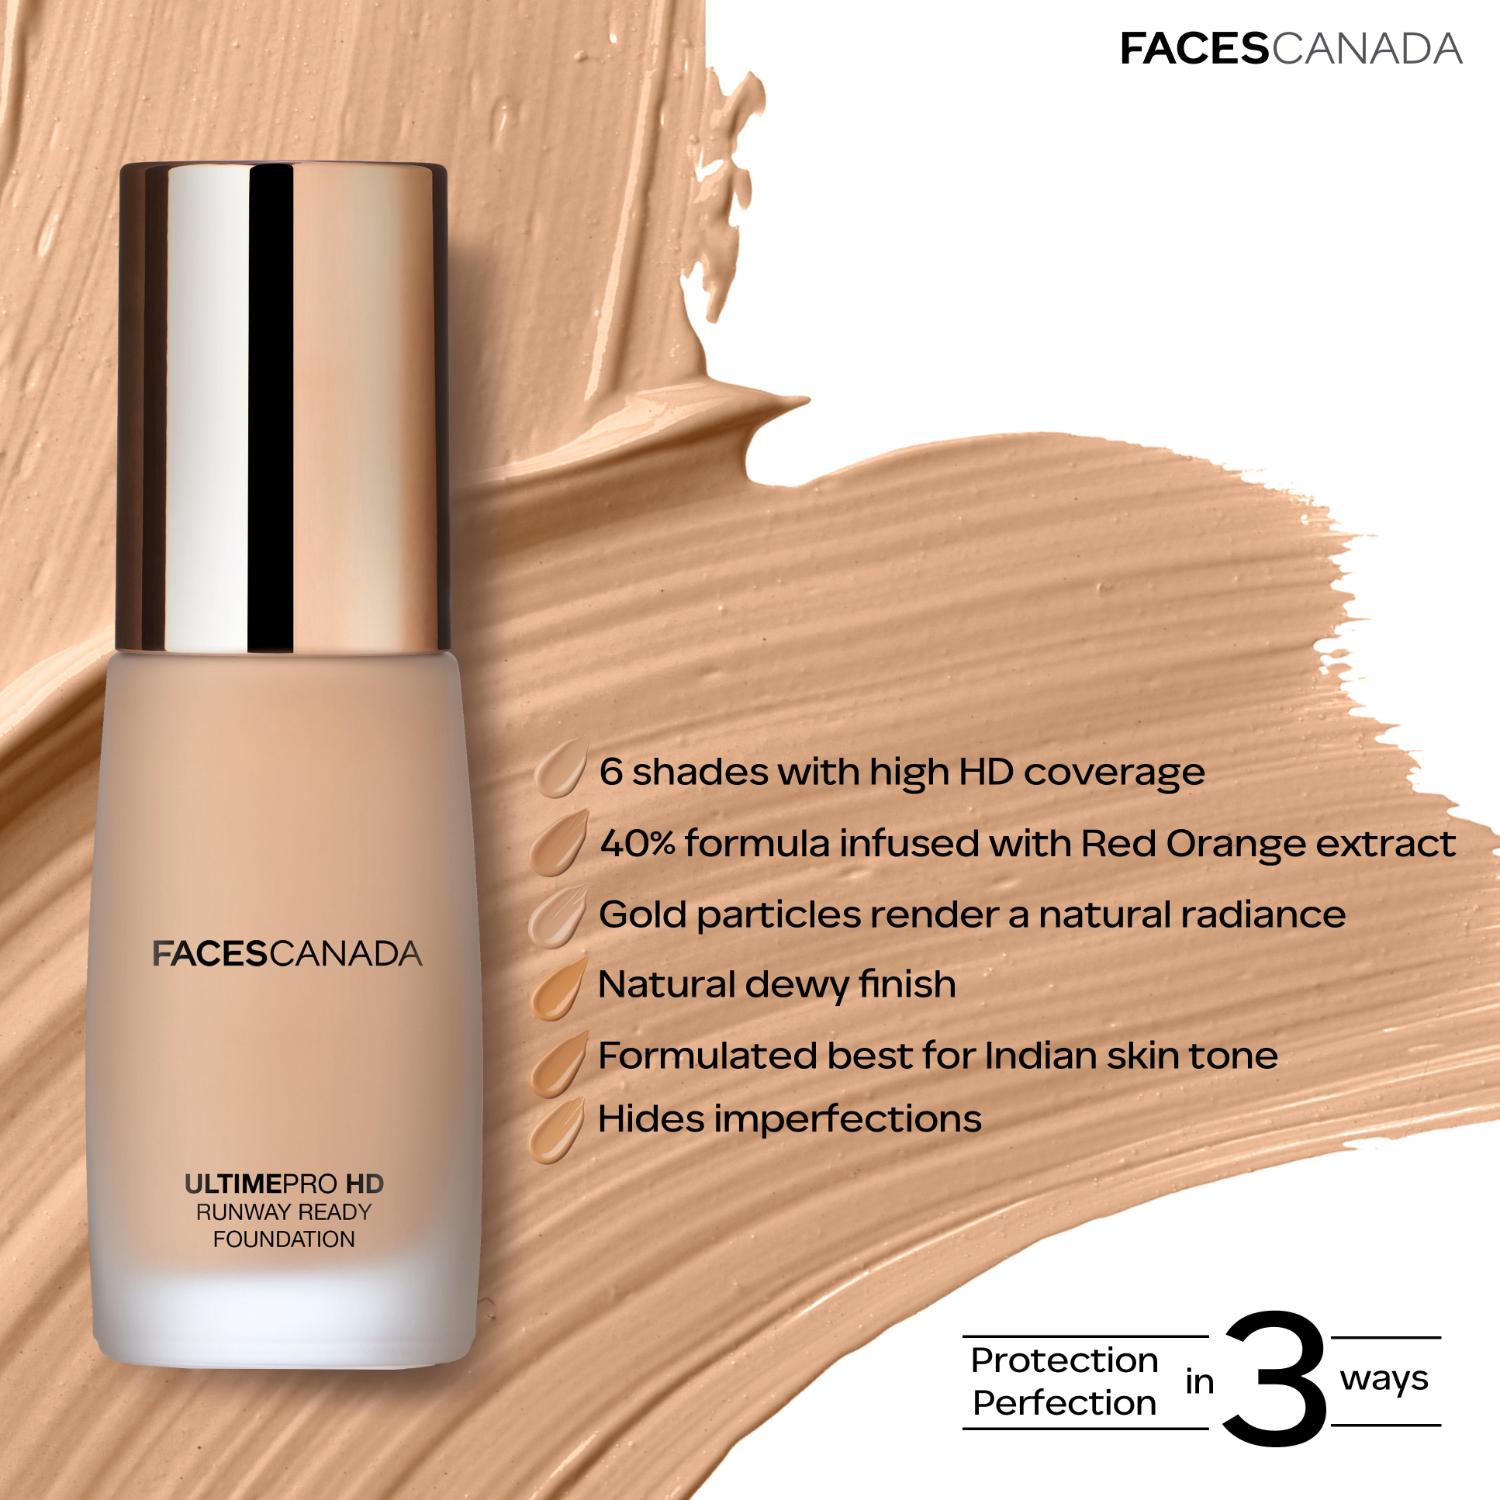 Faces Canada | Faces Canada Ultime Pro HD Runway Ready Foundation - Beige, Radiant Flawless Finish (30 ml)